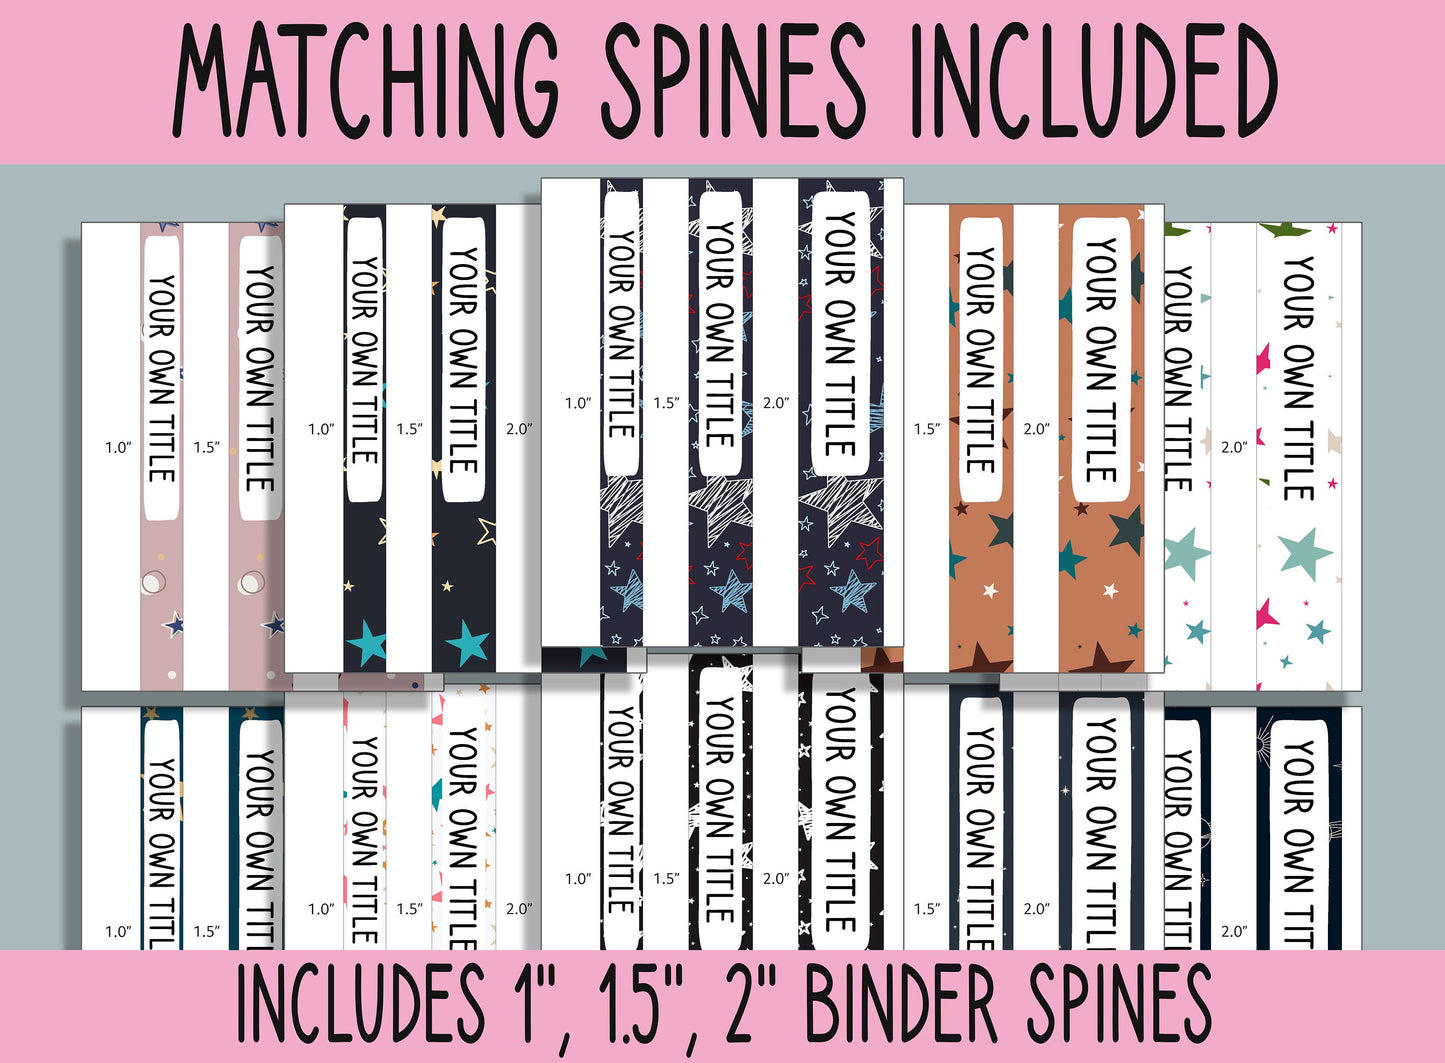 10 Editable Starry Binder Covers, Includes 1", 1.5", 2" Spines, Available in A4 & US Letter, Editing with PowerPoint or PDF Reader